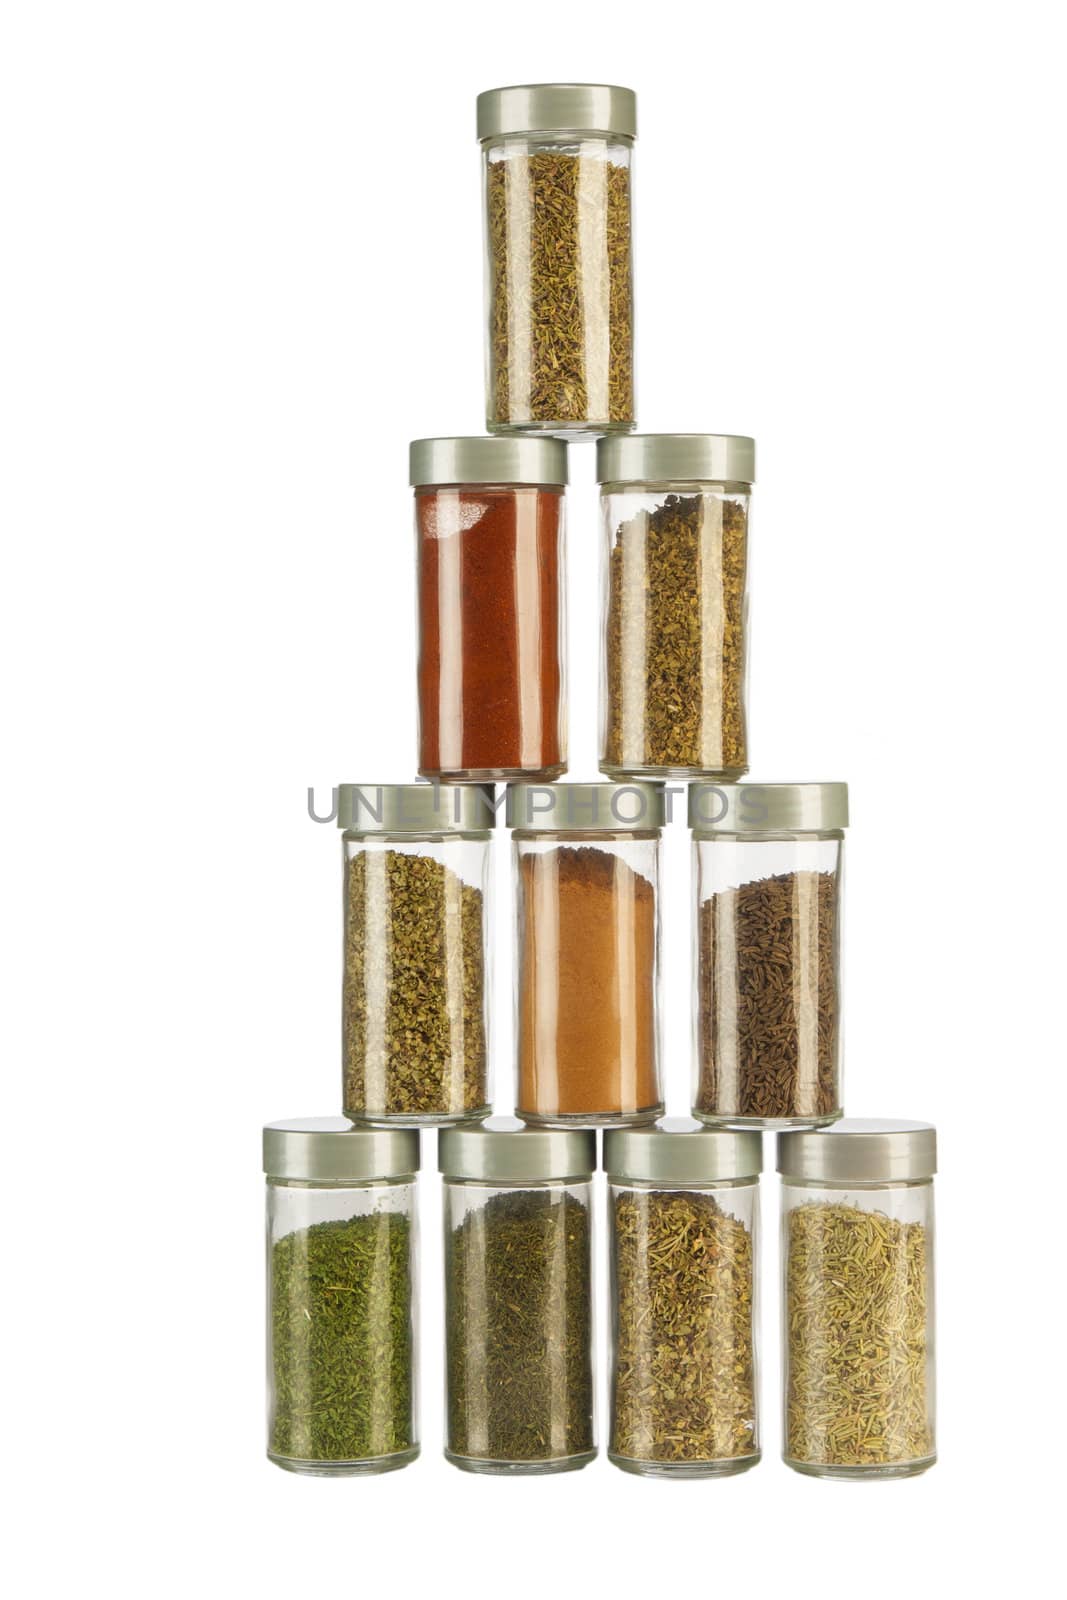 Bottles of colorful spices on white background